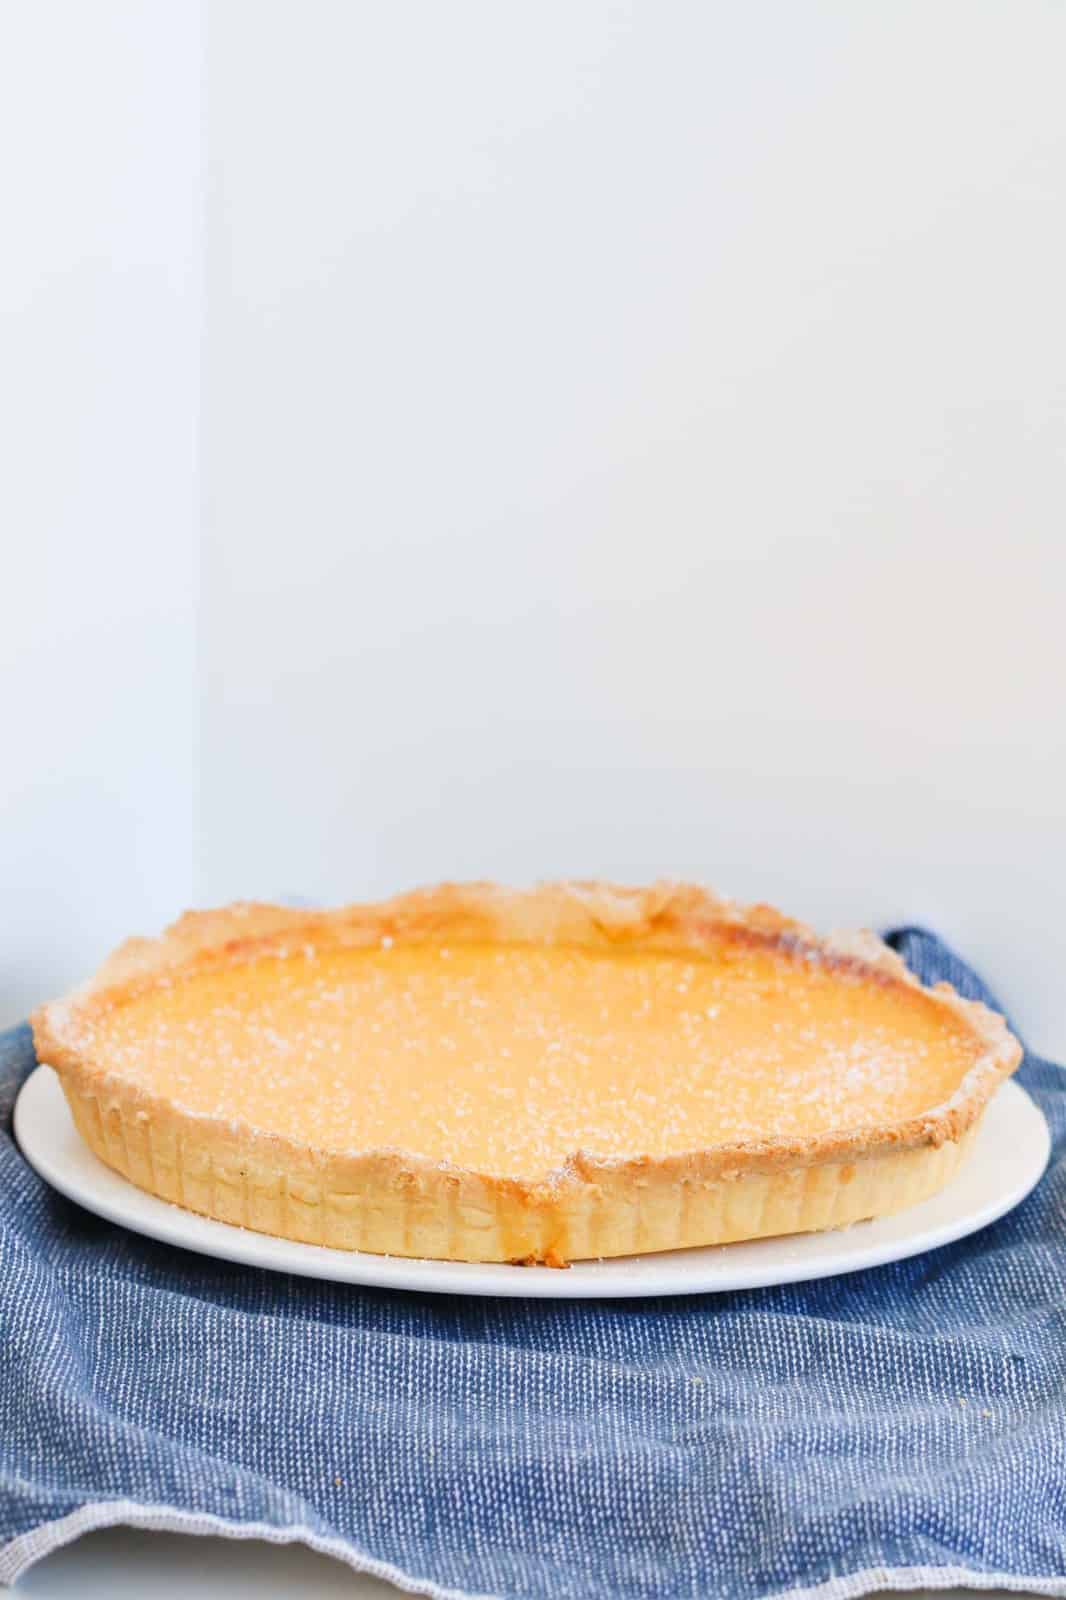 A round dessert tart with pastry and lemon filling.